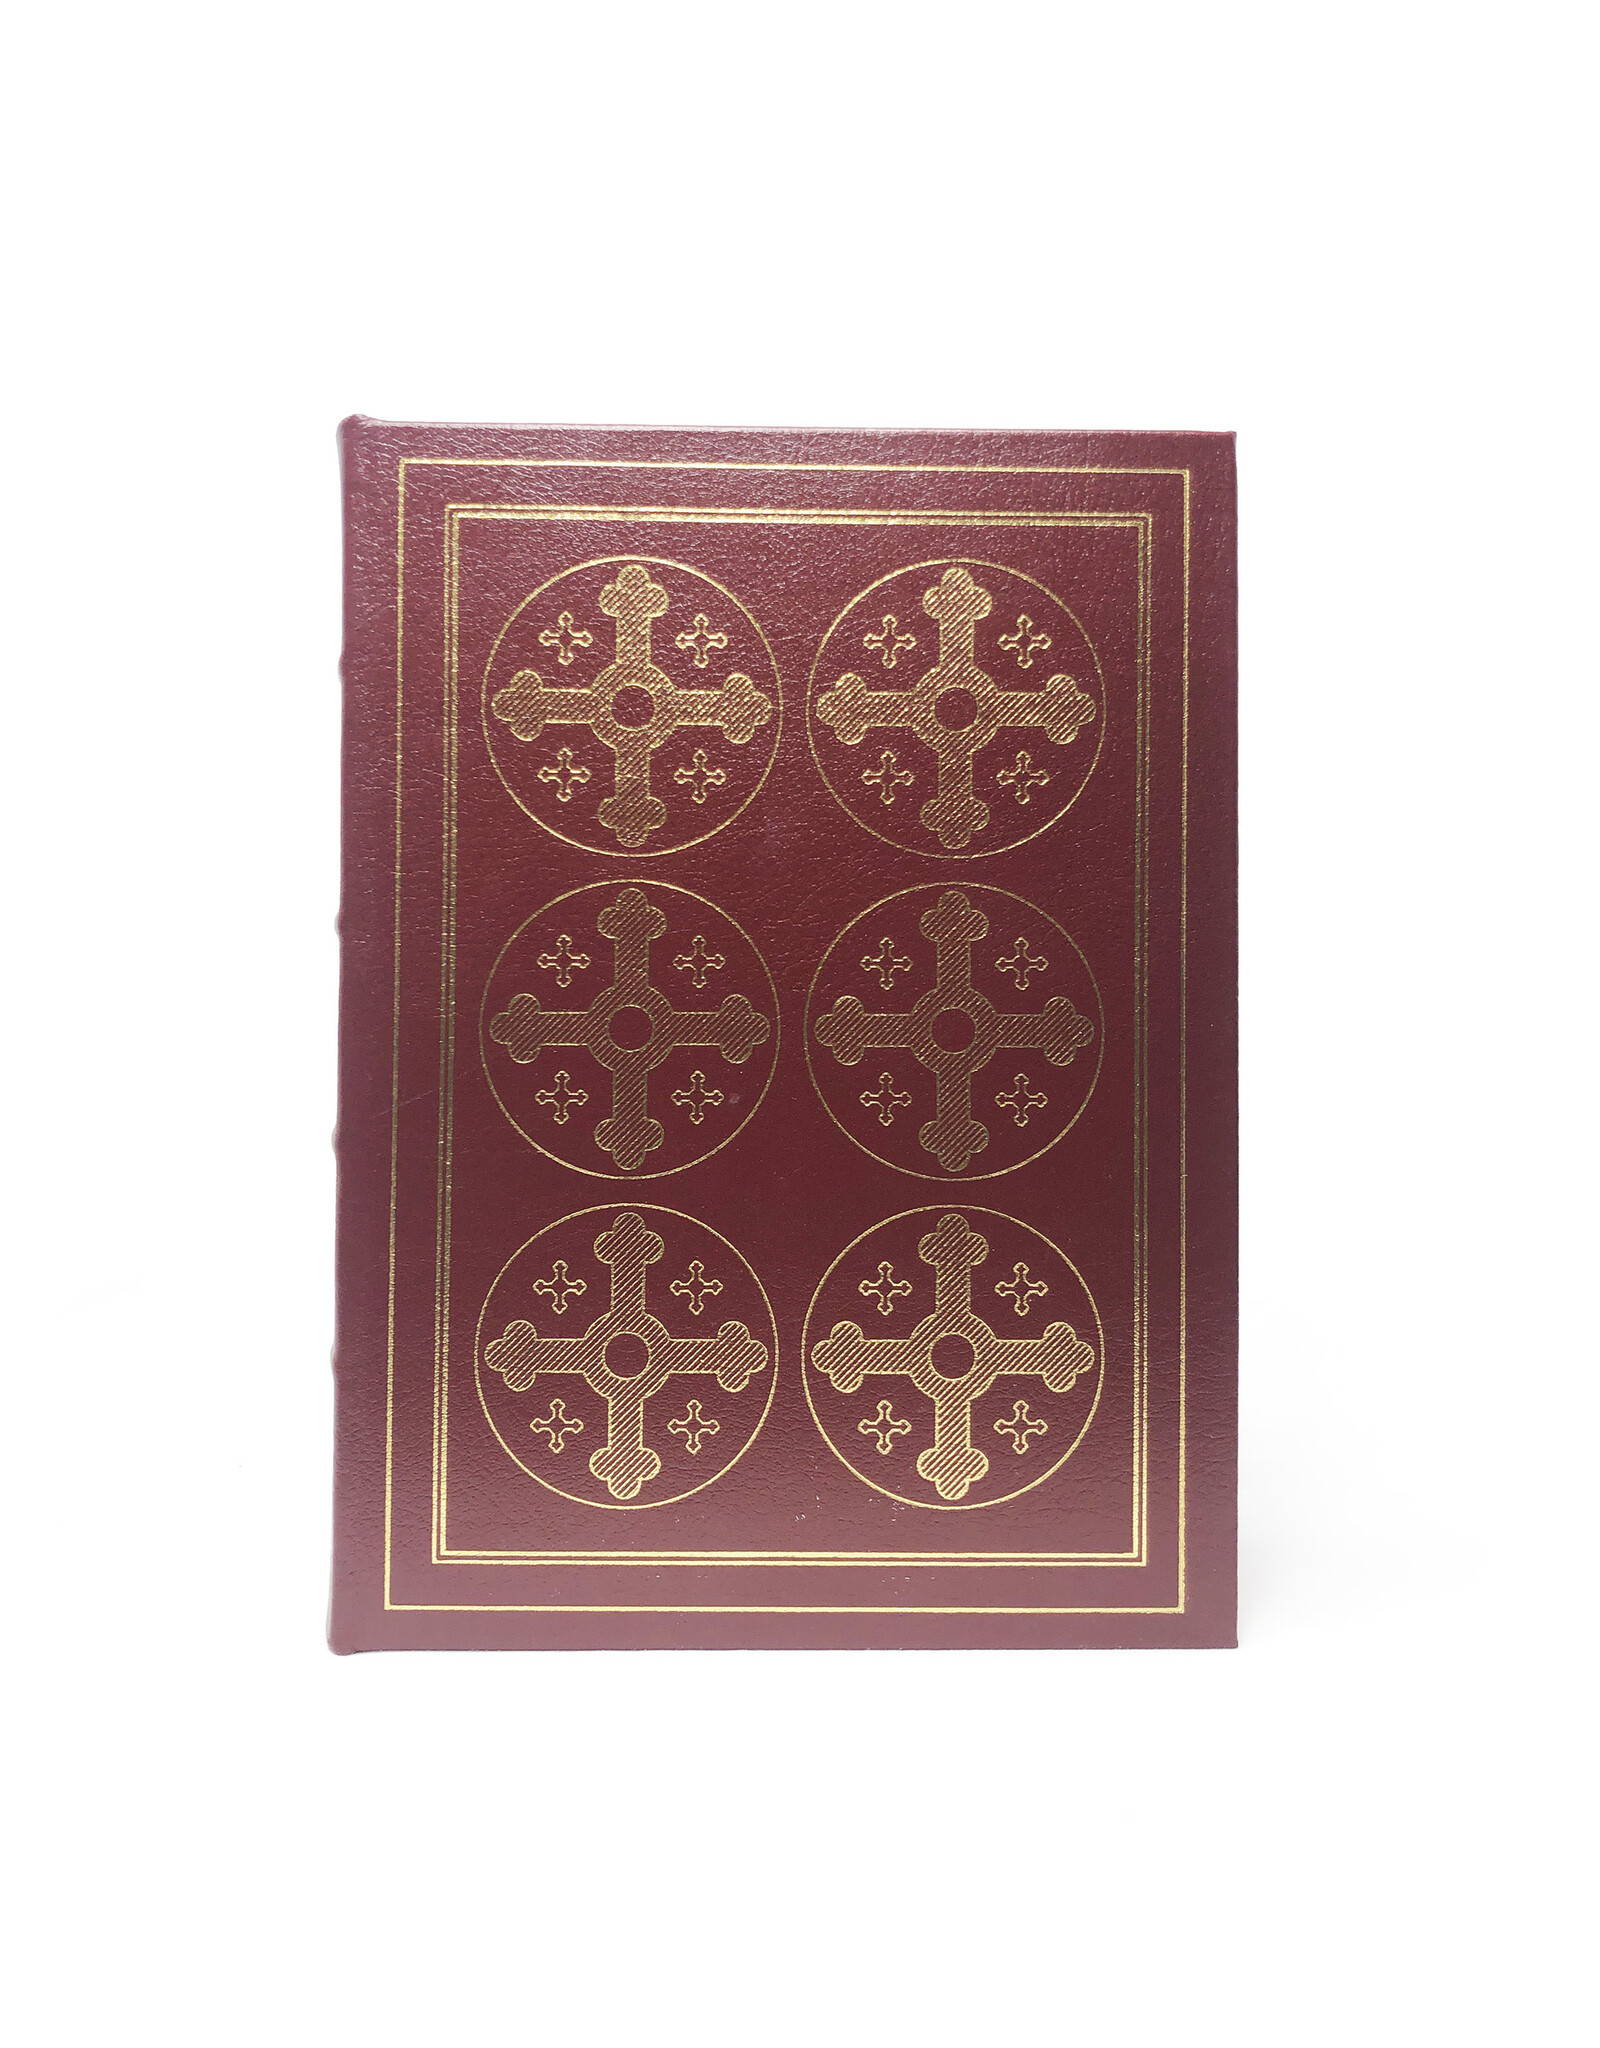 Easton Press Confessions of Saint Augustine Easton Press 100 Greatest Books Ever Written Deluxe Leather Edition